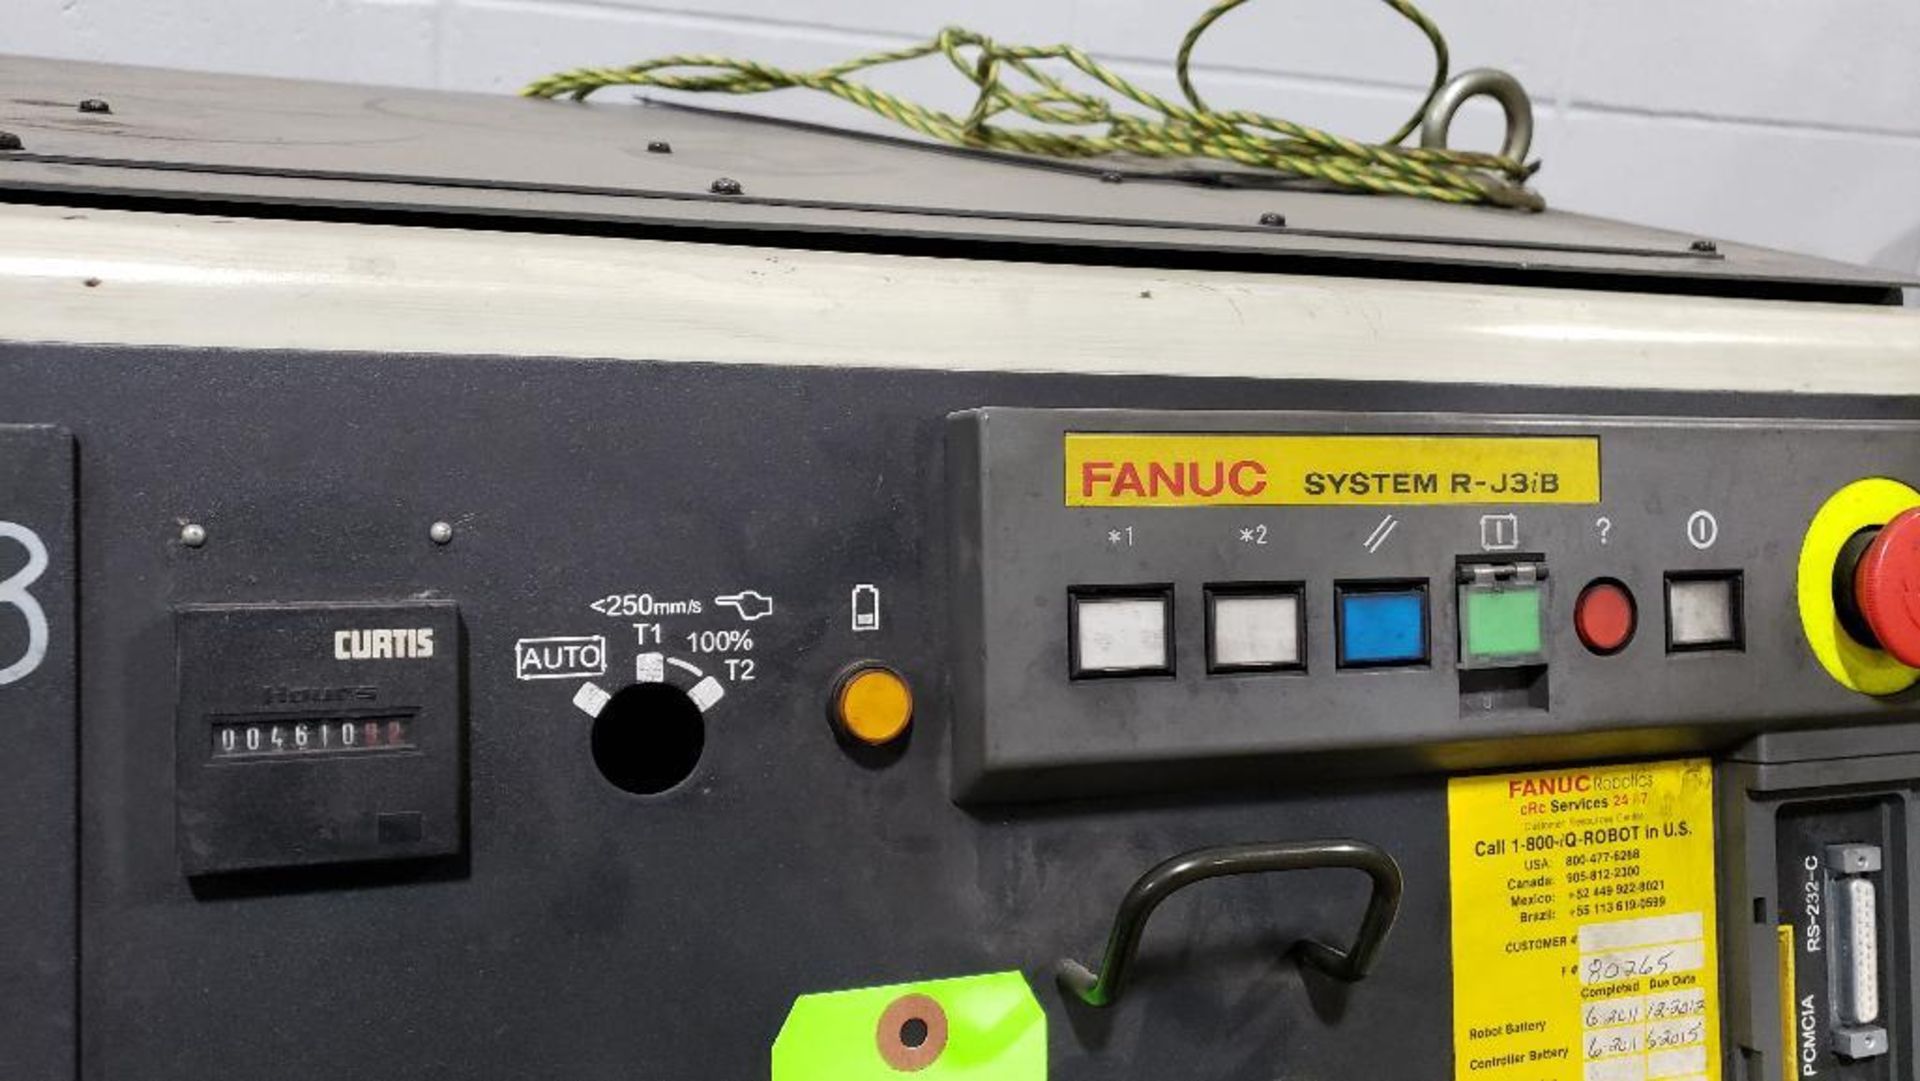 Fanuc R-2000iA/165F robot with Fanuc System R-J3iB controller. - Image 9 of 13